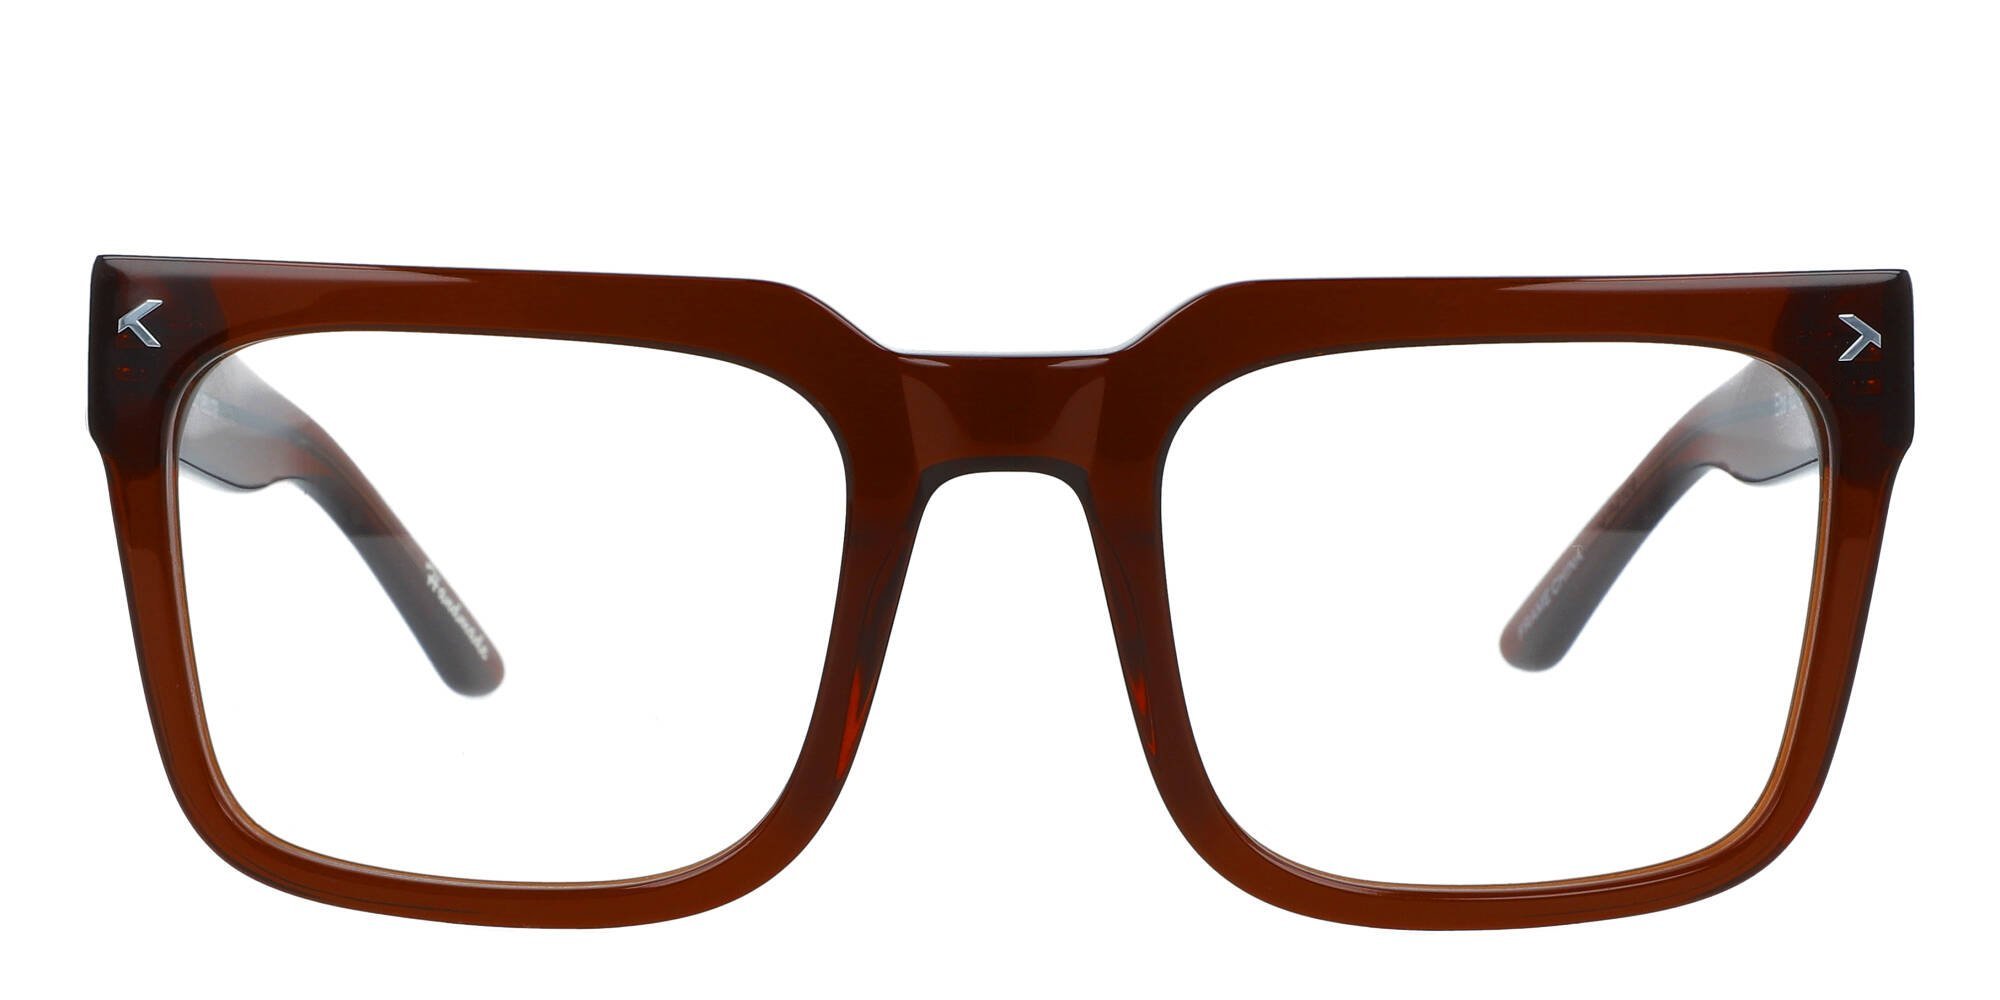 Front Glasses Image